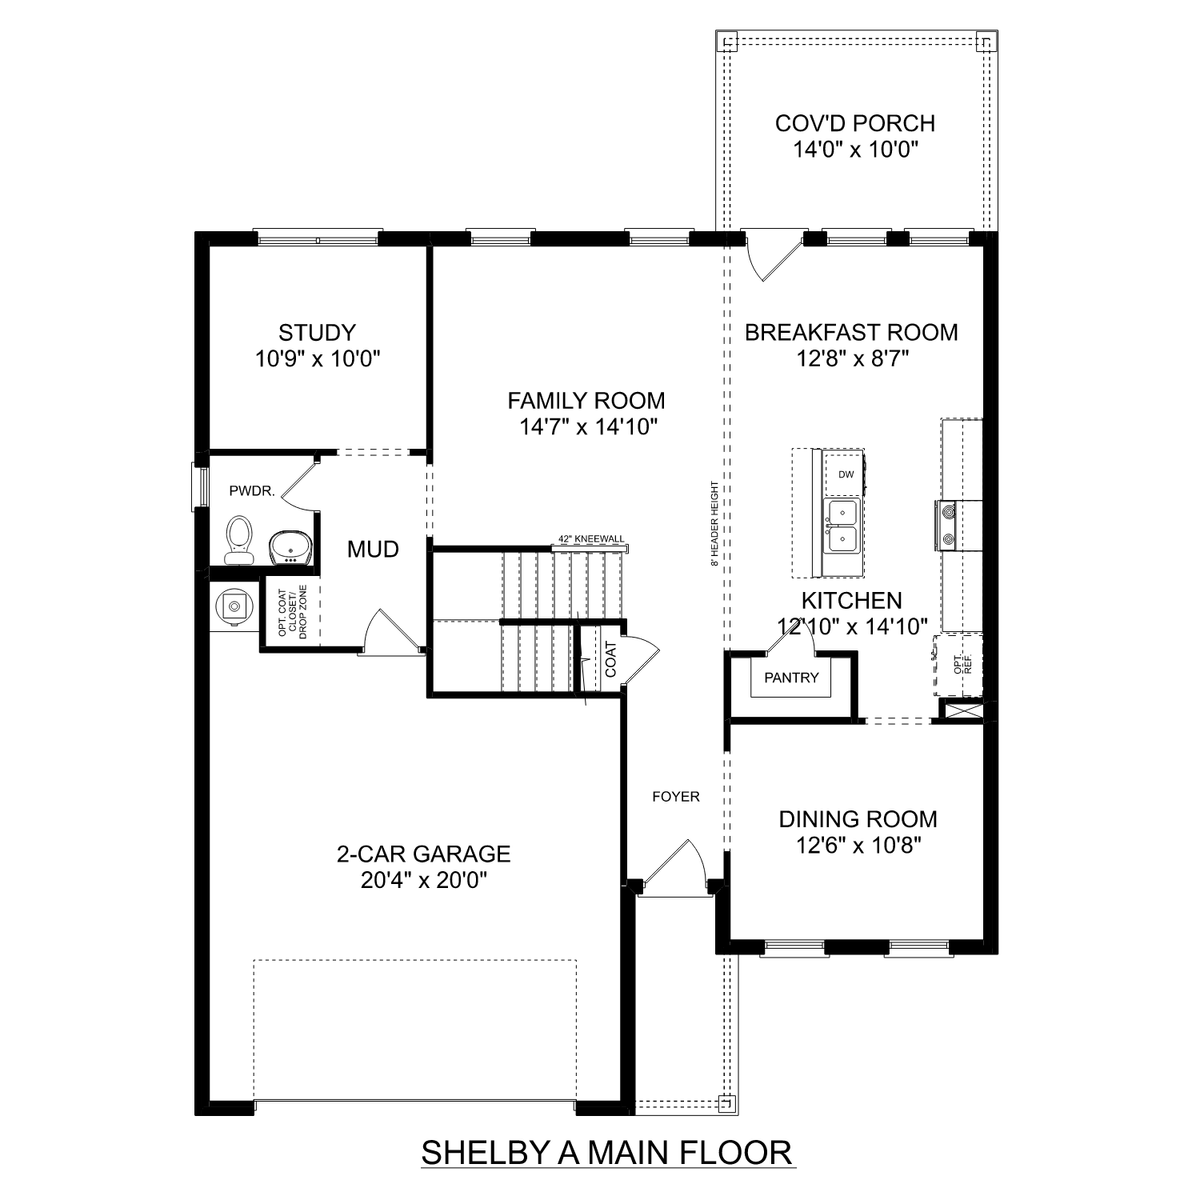 1 - The Shelby A buildable floor plan layout in Davidson Homes' The Reserve at North Ridge community.